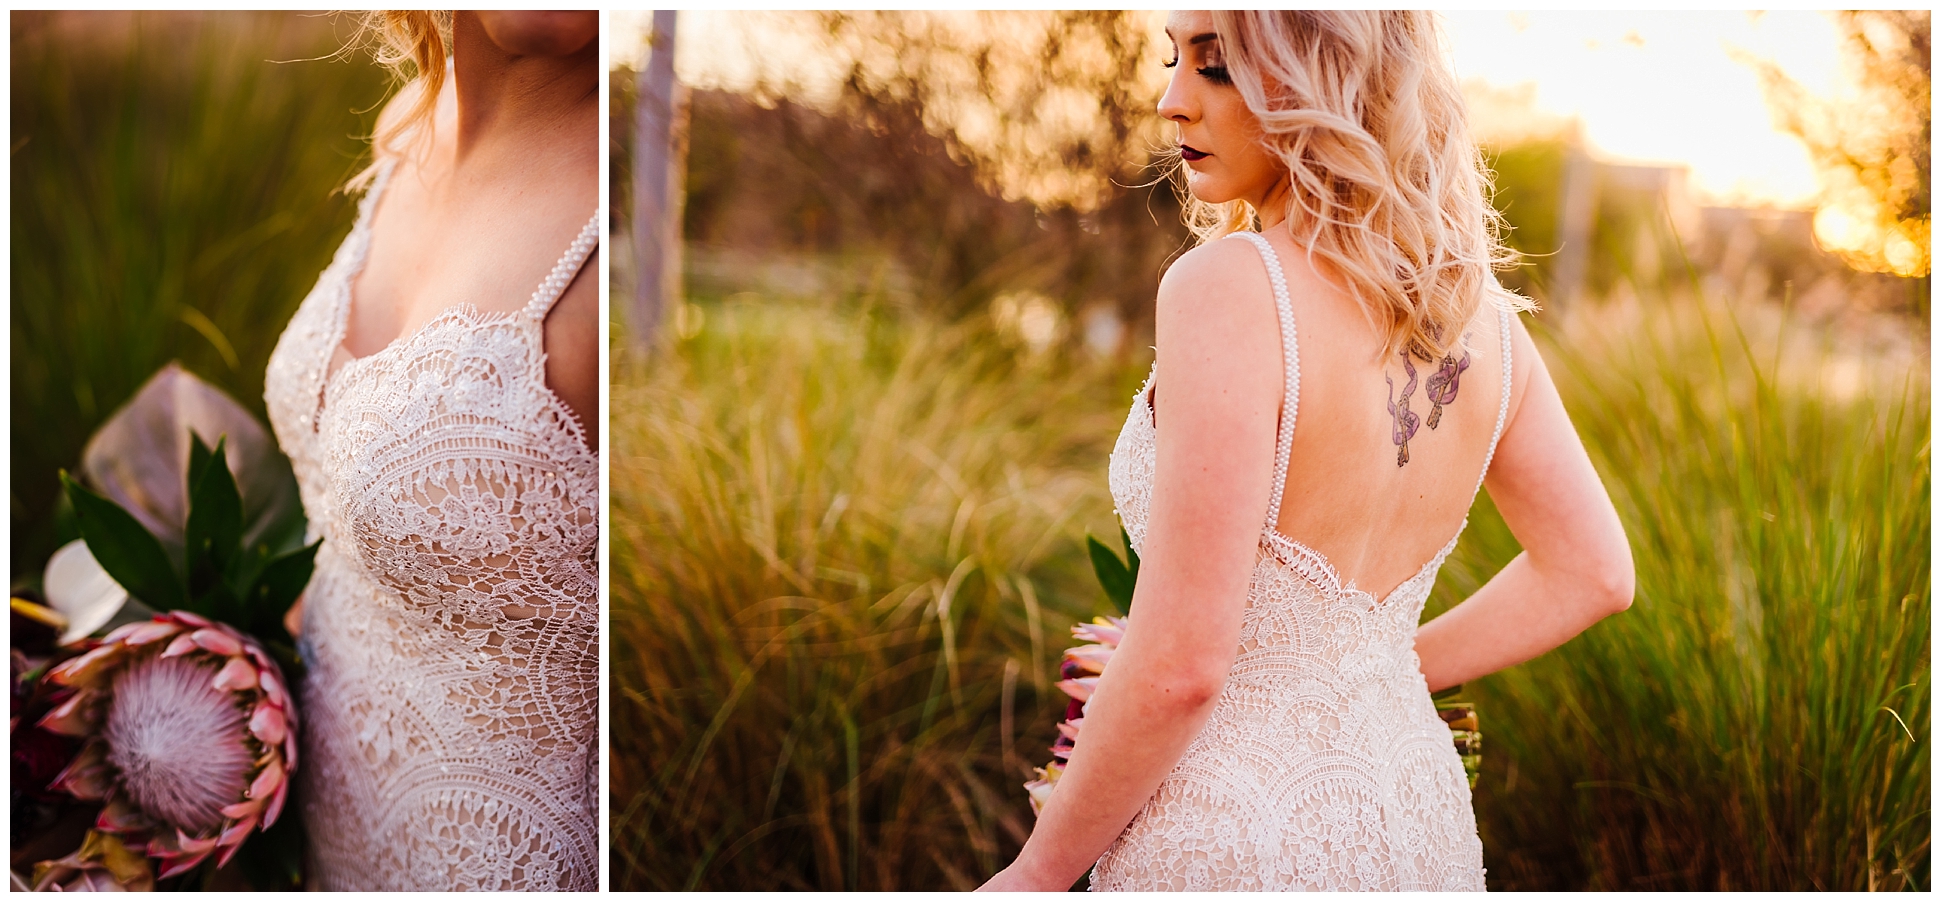 Tampa-theater-sunset-bridal session-protea-lace dress_0030.jpg